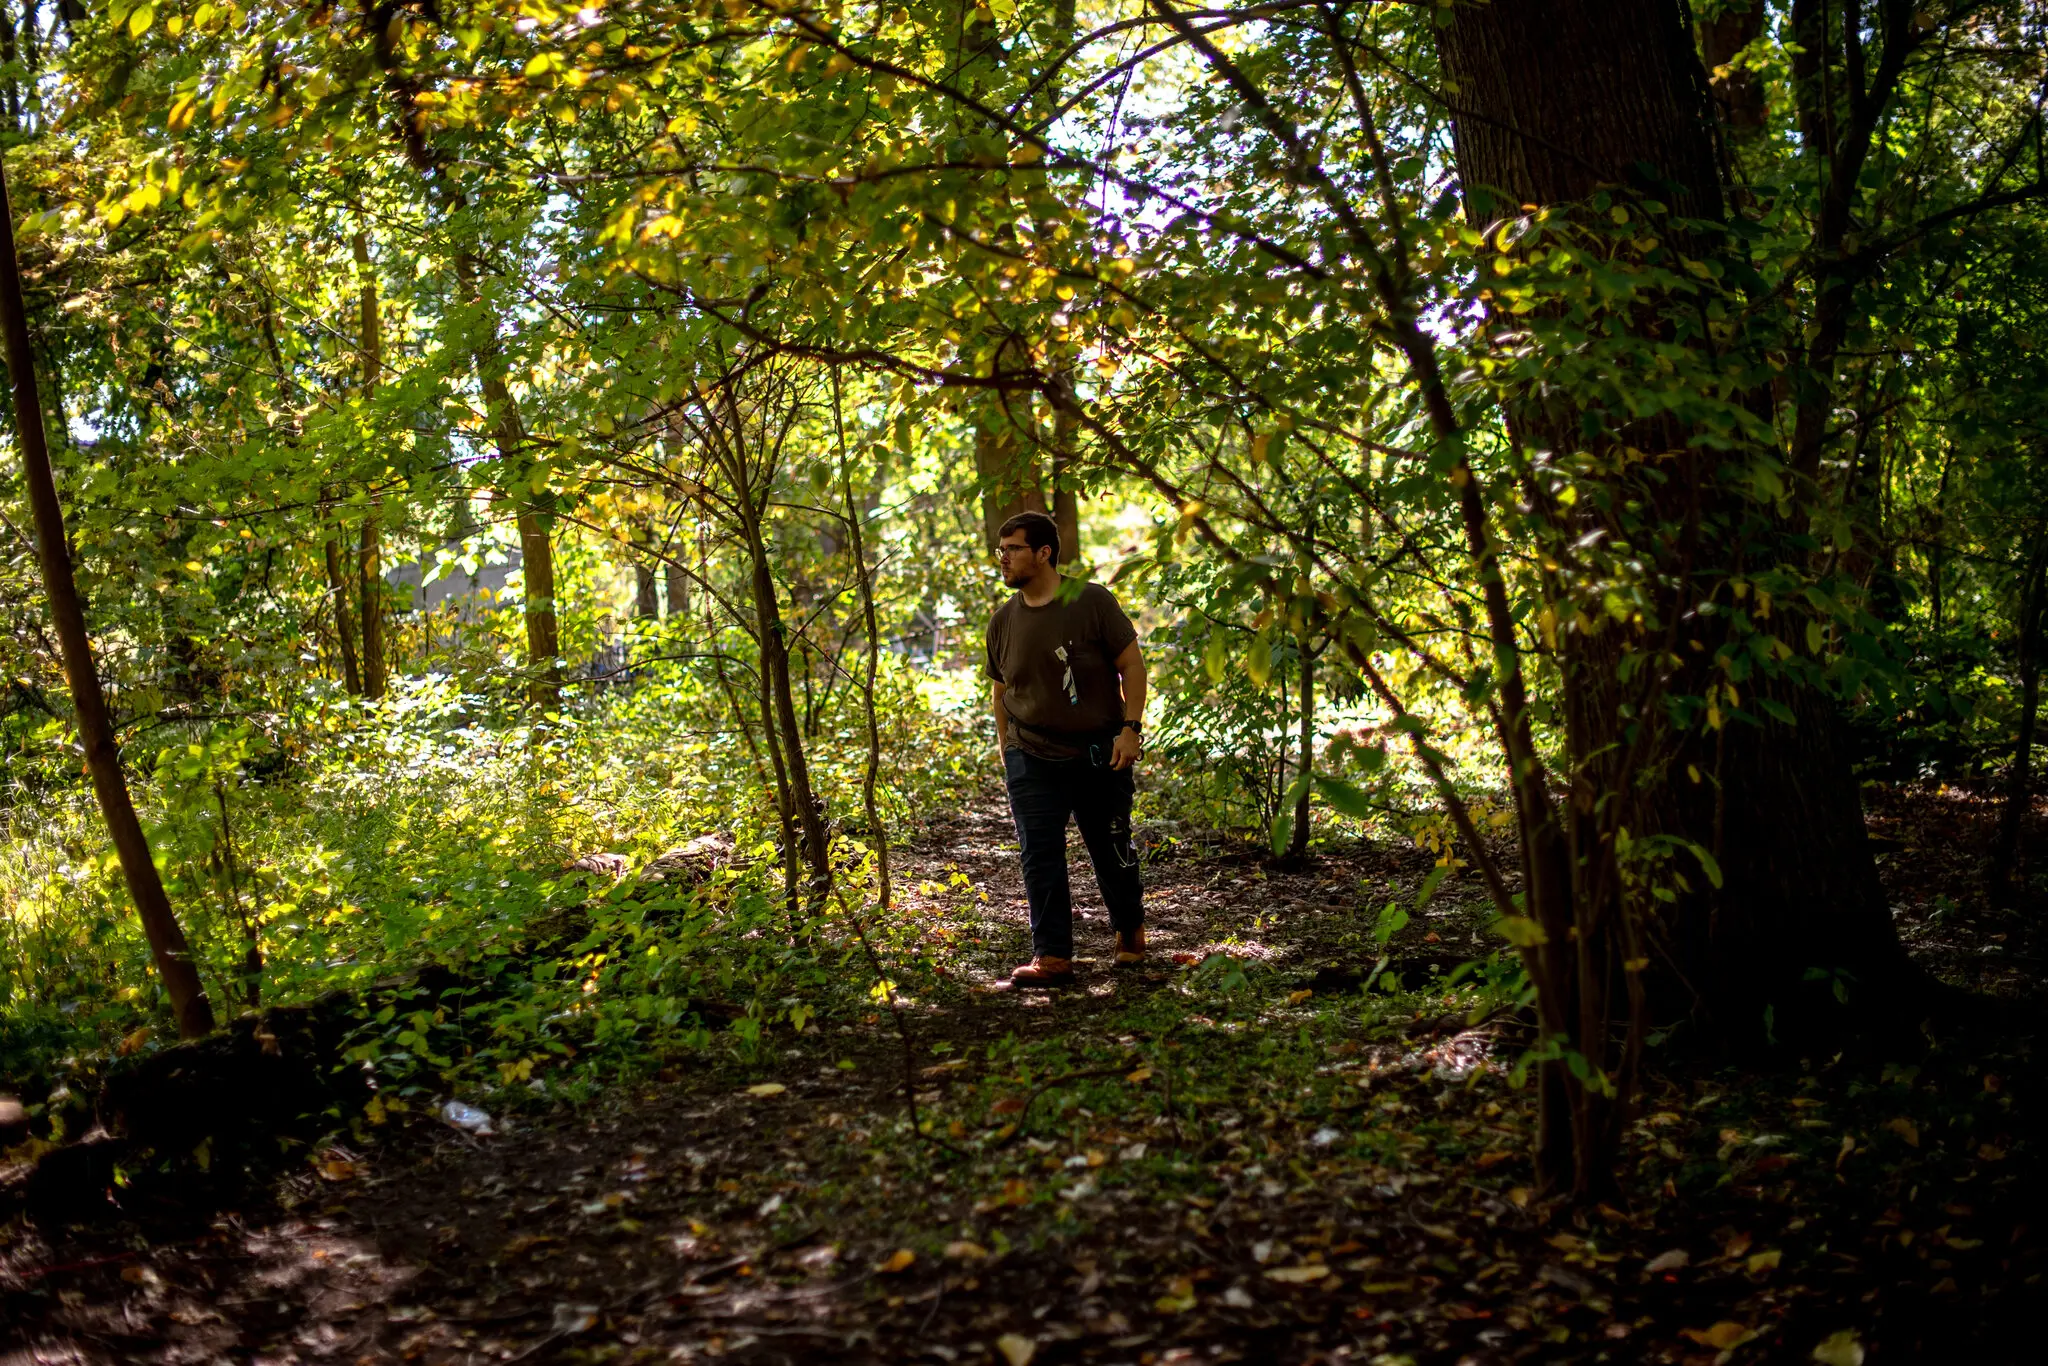 Dr. Nic Helmstetter, who makes weekly primary care rounds with Street Medicine Kalamazoo, brings addiction treatment supplies to patients living in the woods. Photo: Hilary Swift / The New York Times